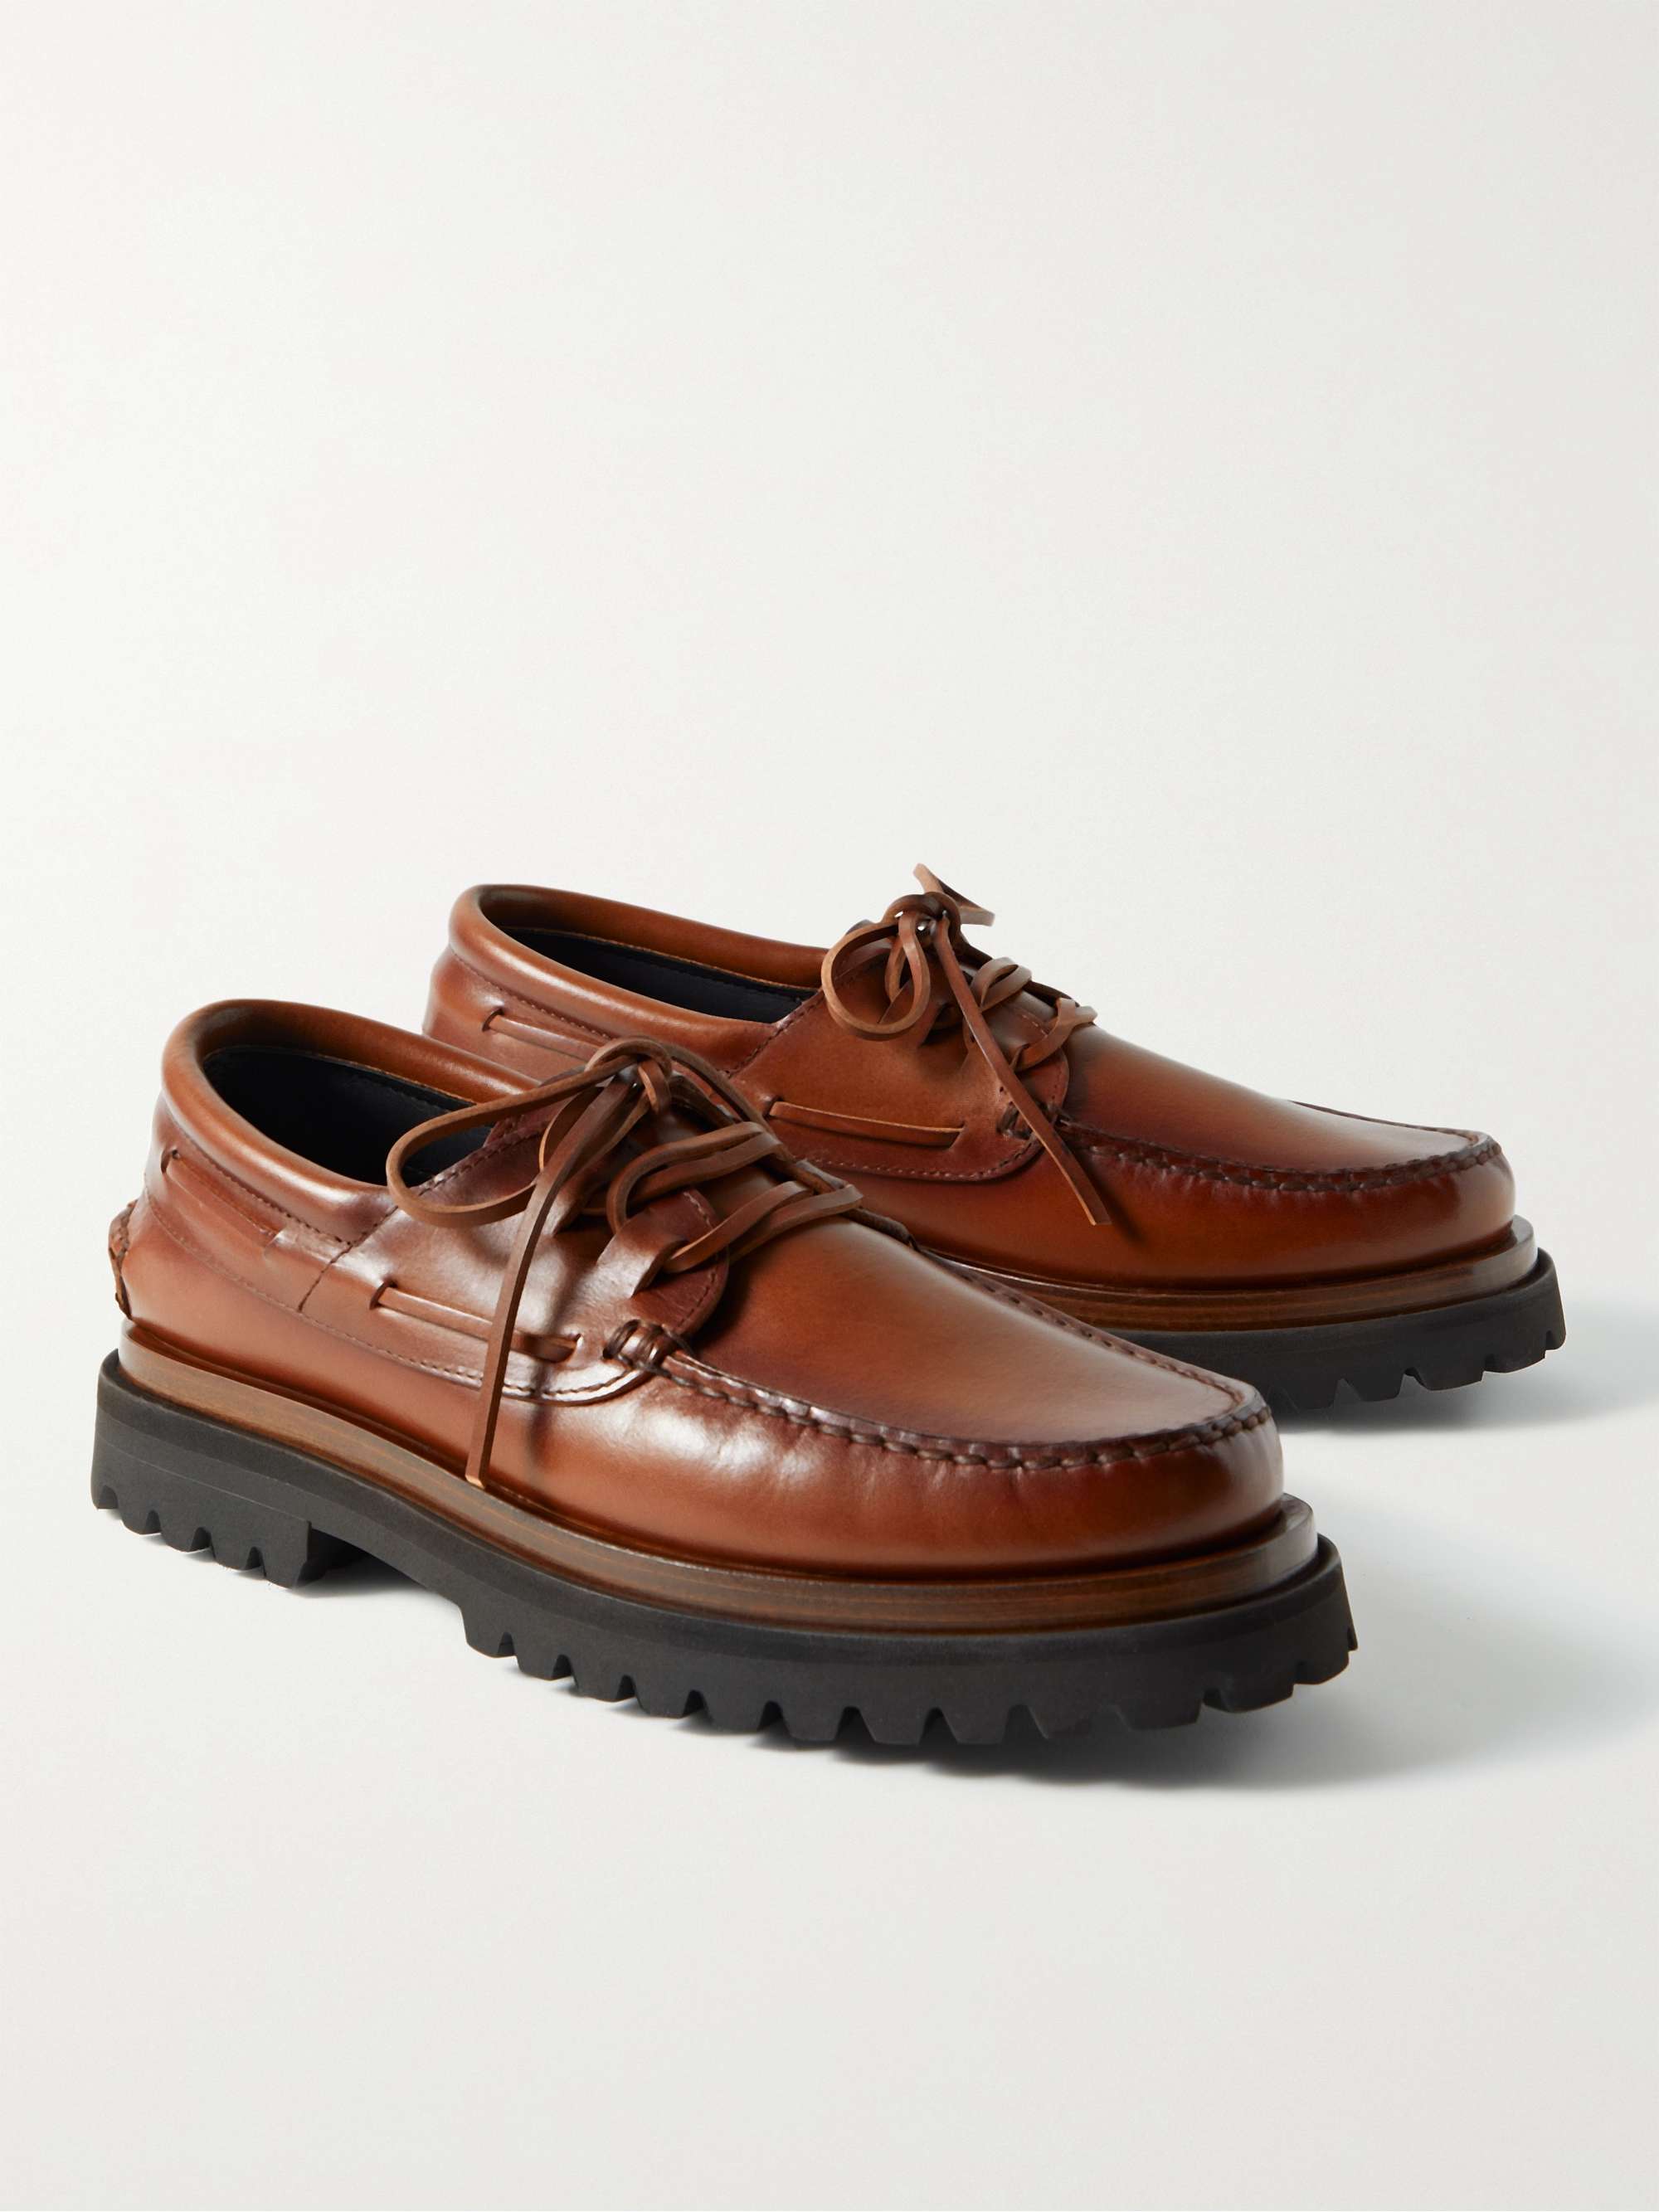 OFFICINE CREATIVE Heritage Leather Boat Shoes